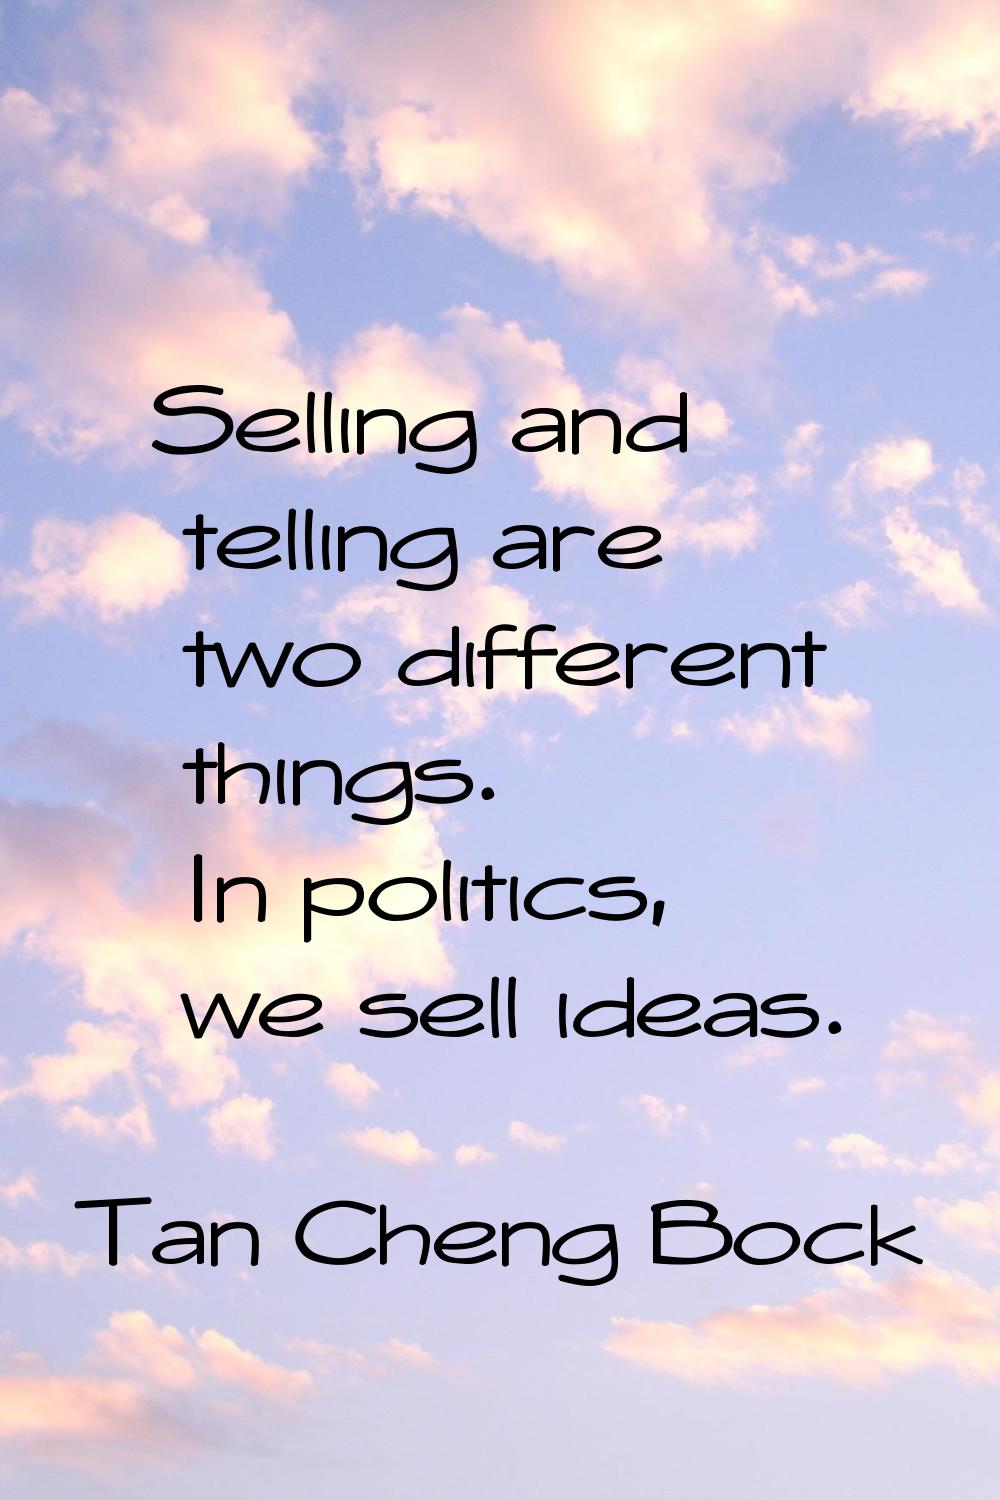 Selling and telling are two different things. In politics, we sell ideas.